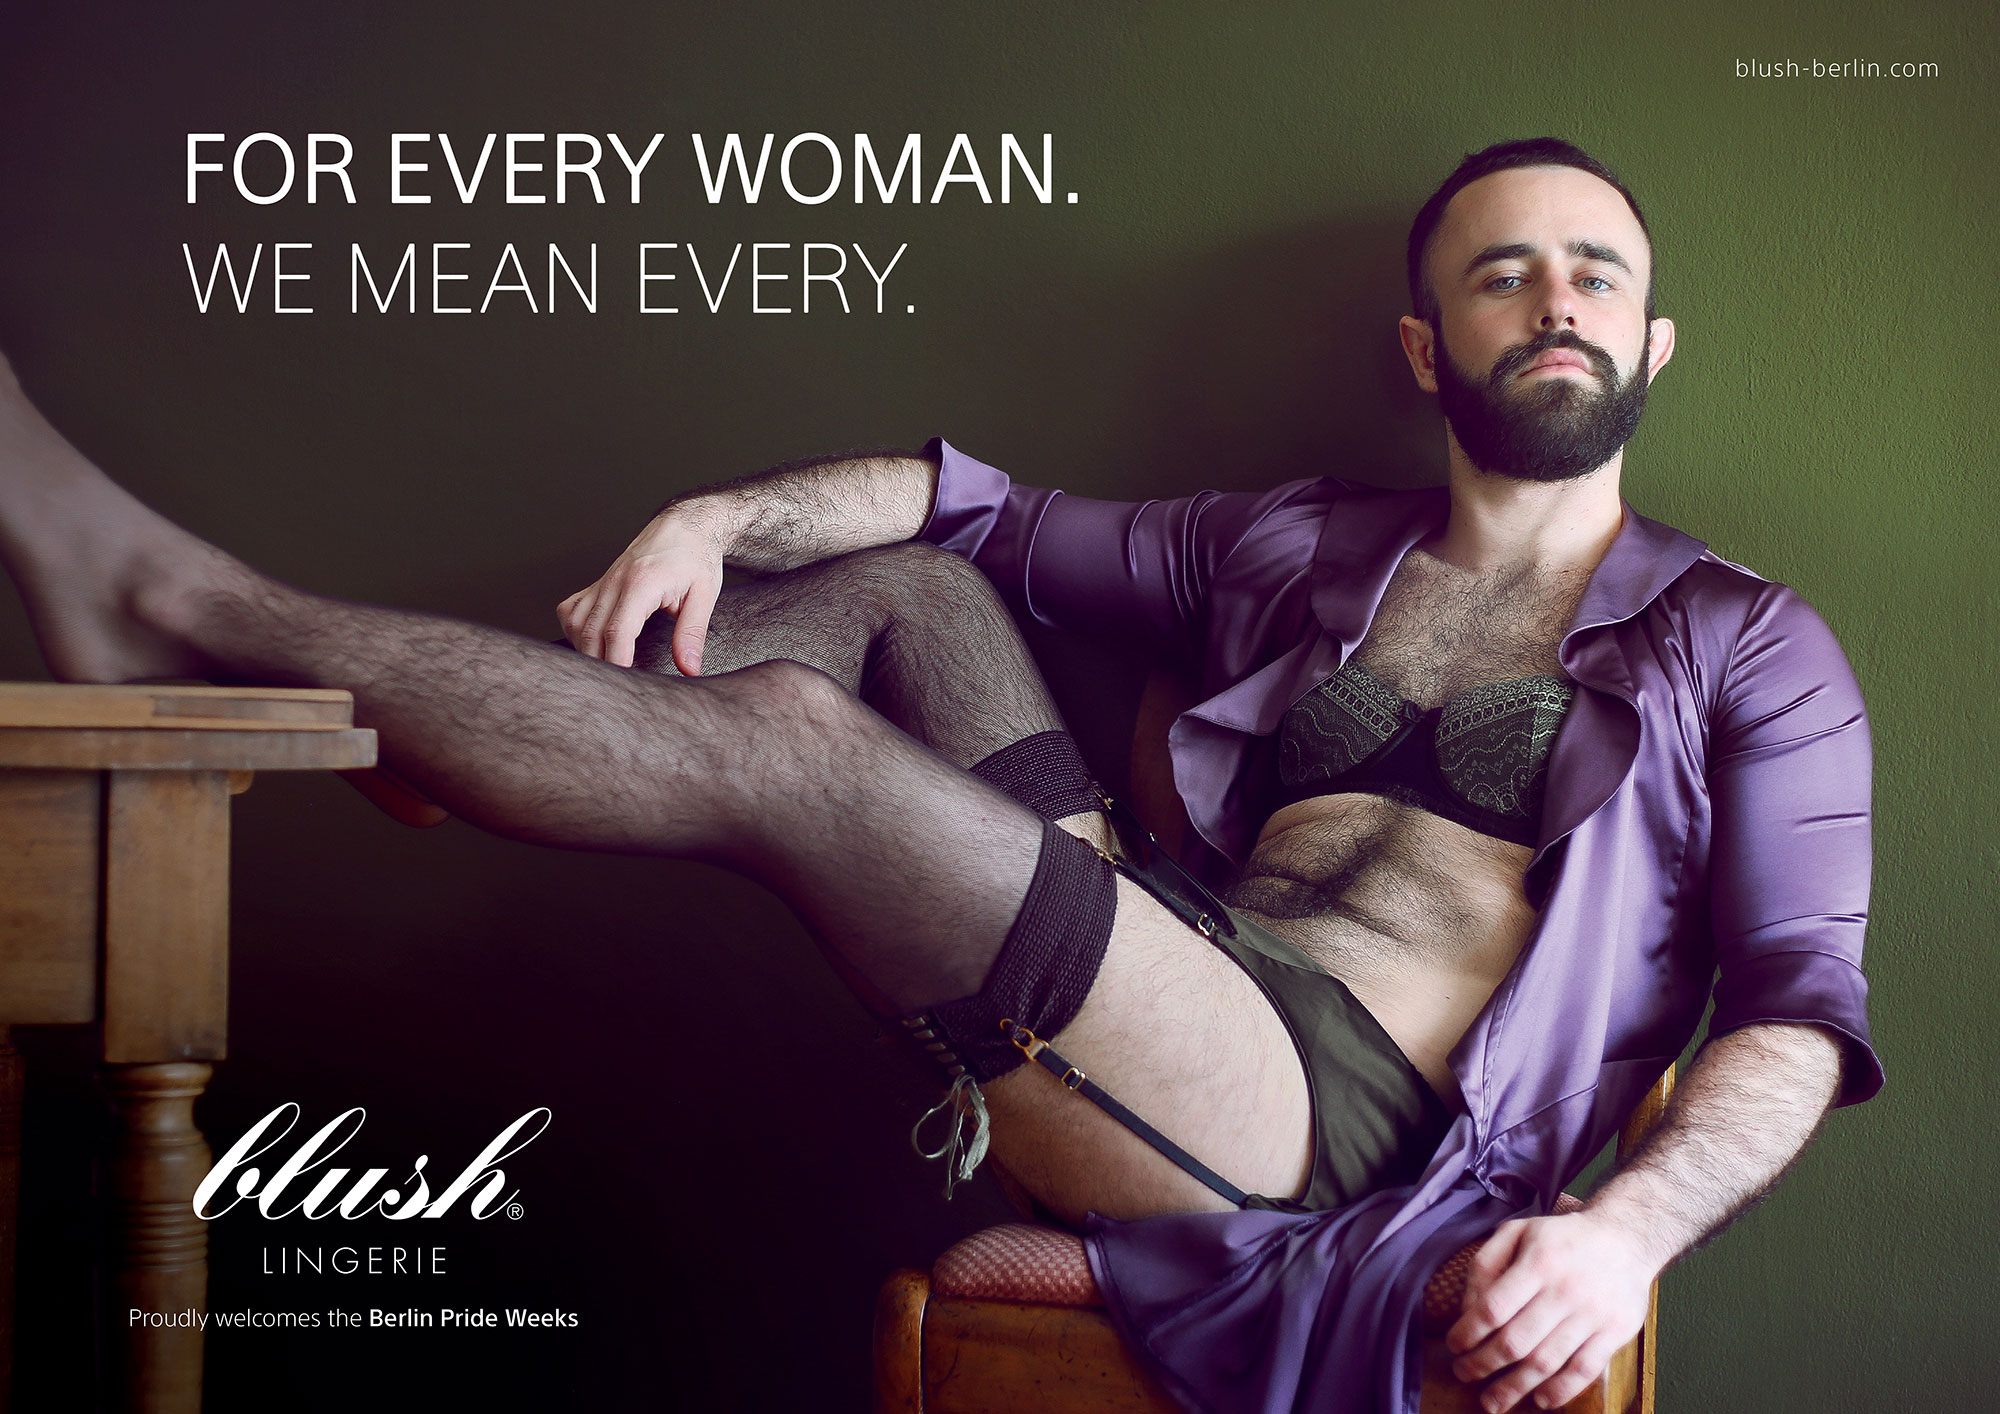 Blush Lingerie - For every woman. We mean every. - OOH Germany 2017 Adland®